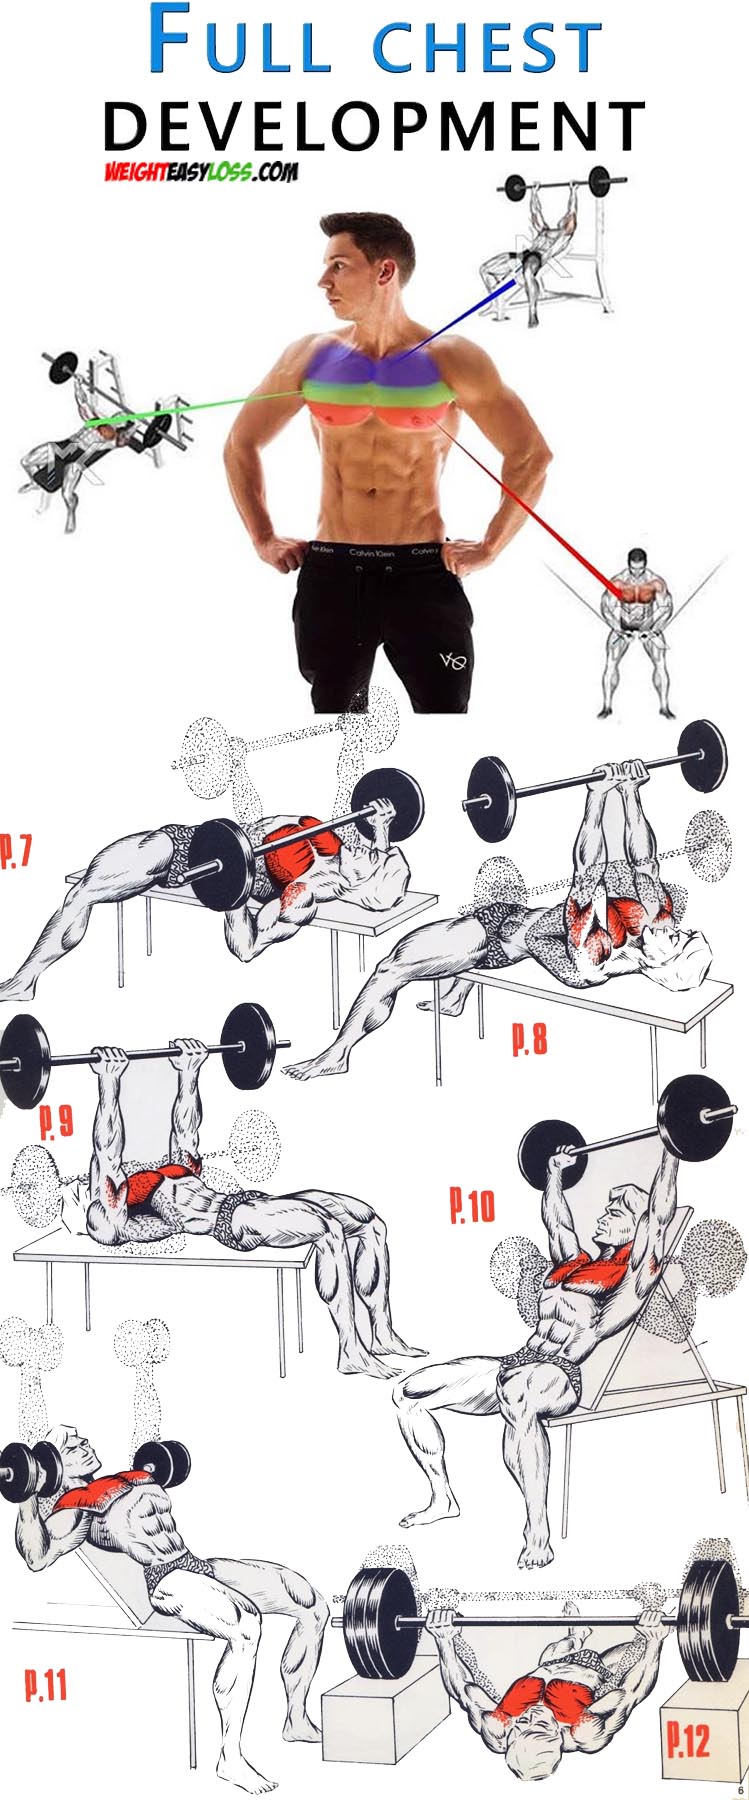 HOW TO WORKOUT ON UPPER & LOWER CHEST